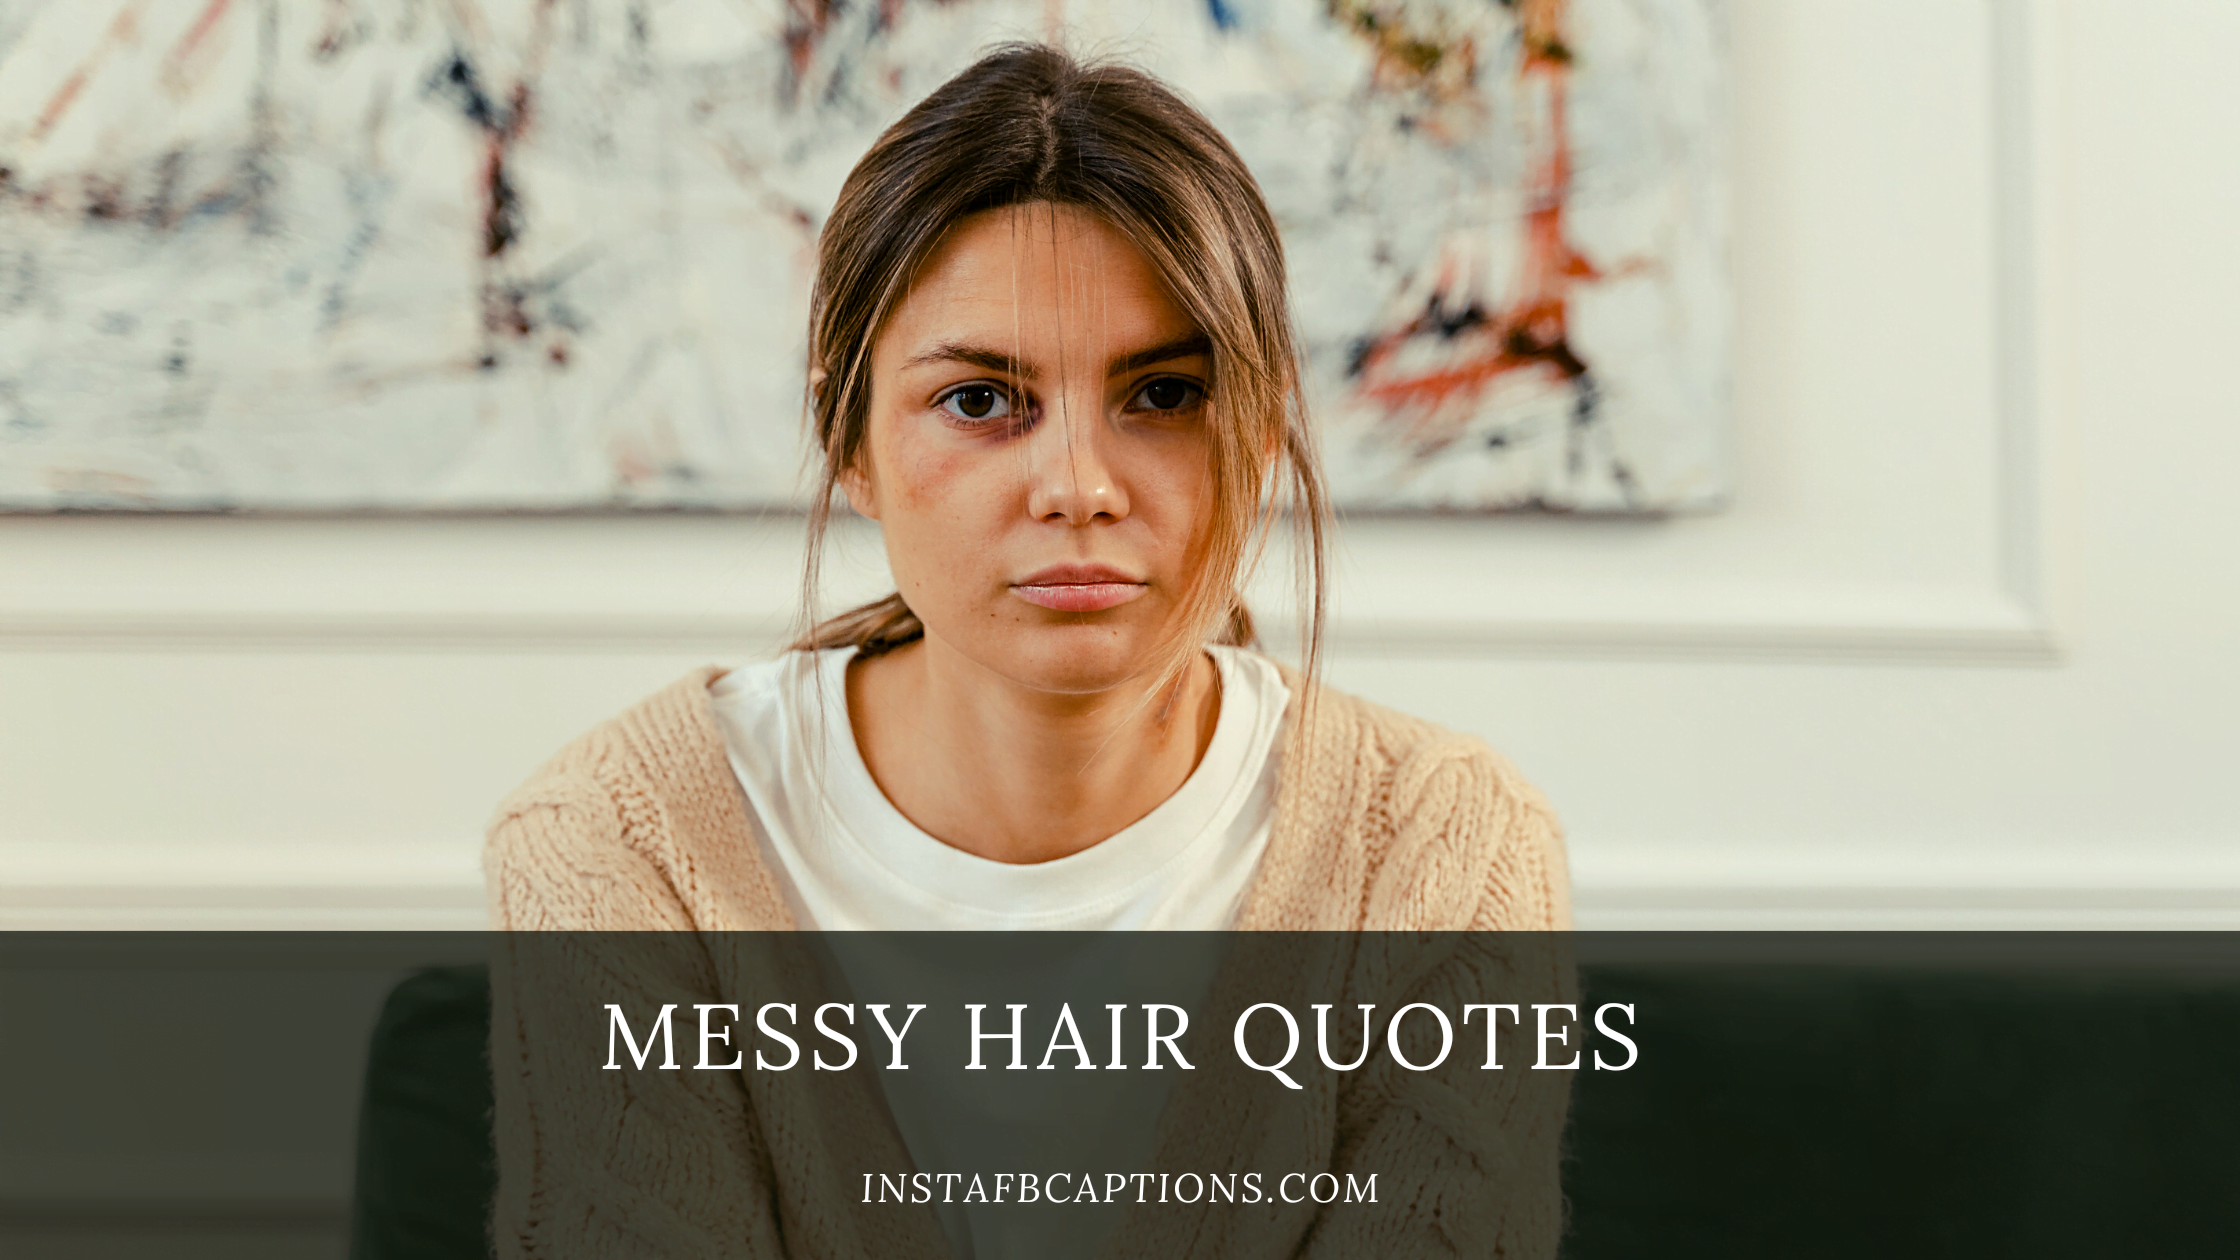 Messy Hair Quotes  - Messy Hair Quotes - 112 Messy Hair Instagram Captions Quotes in 2022